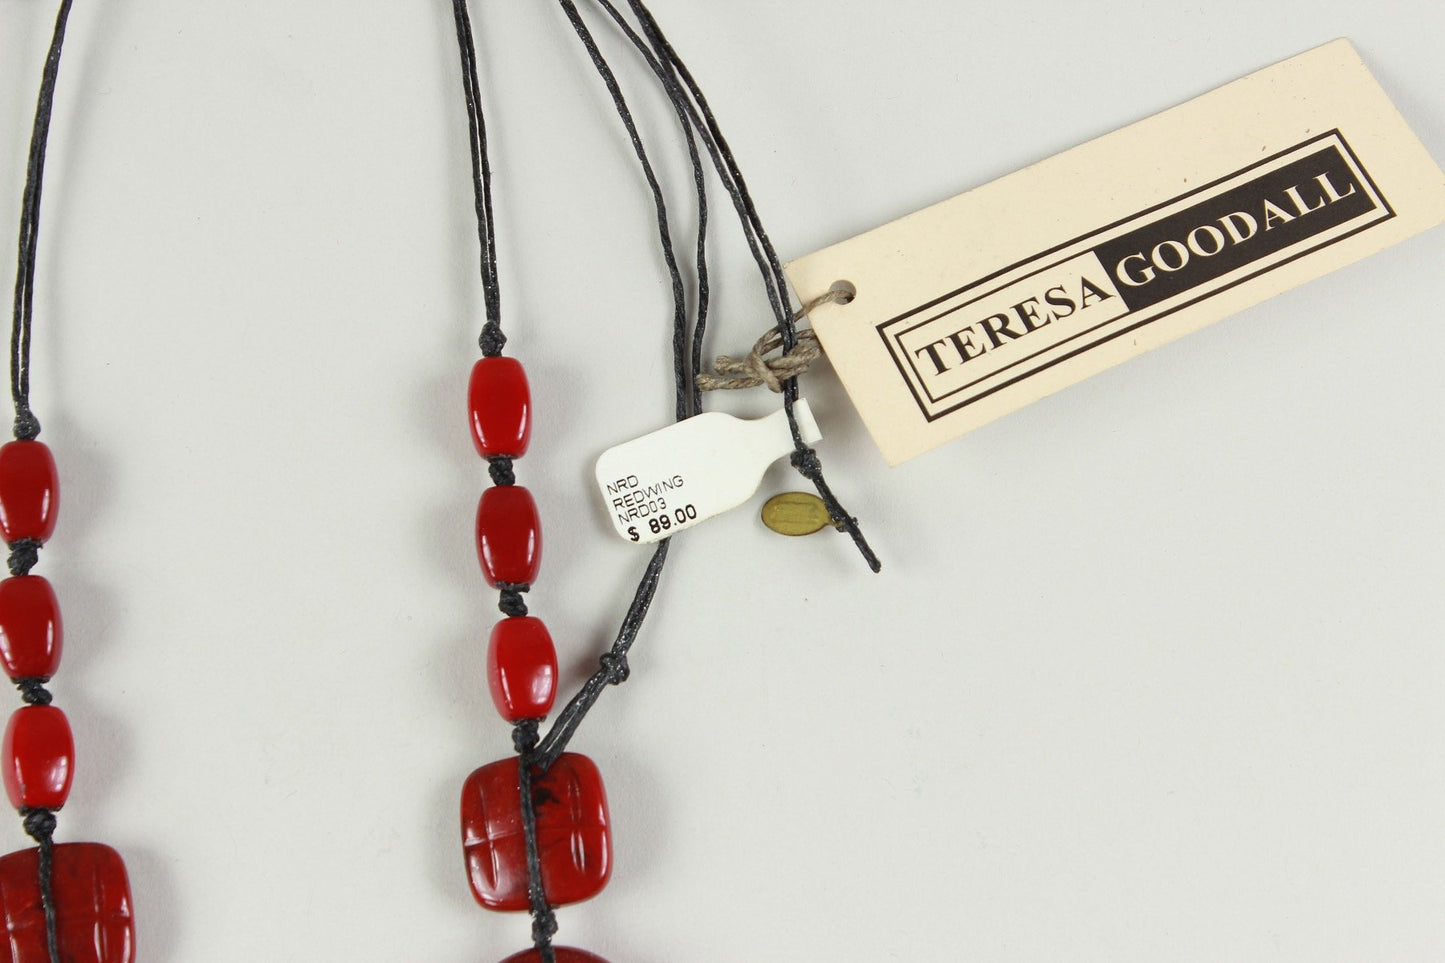 Theresa Goodall Redwing Pendant Necklace